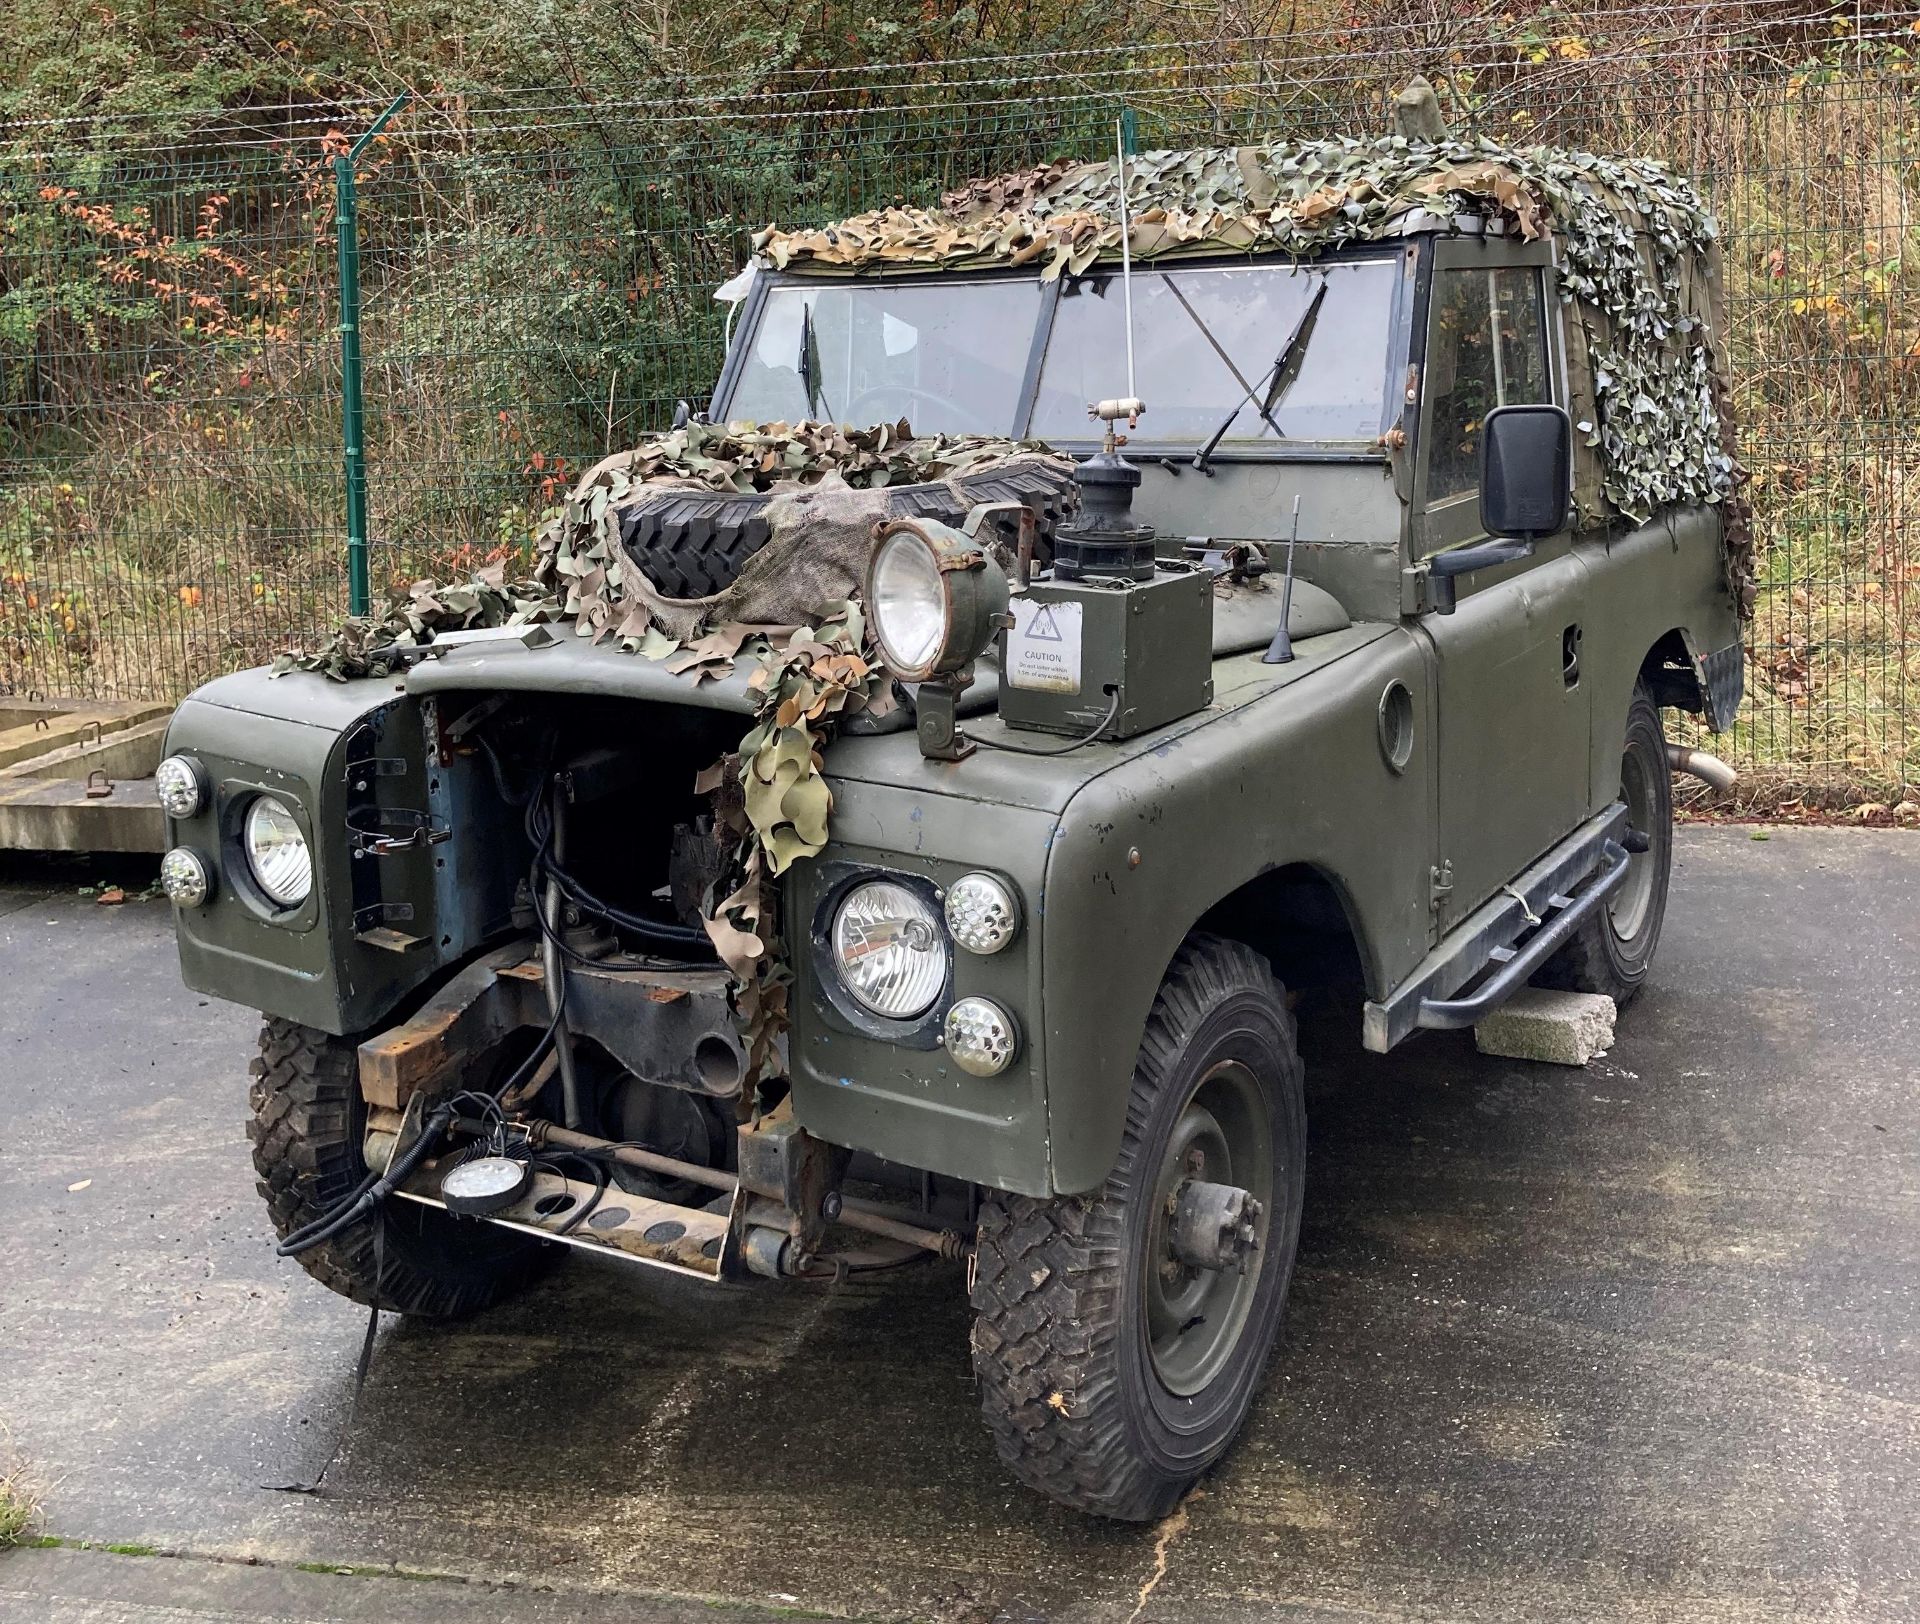 LAND ROVER LIGHT 4X4 UTILITY 2500cc - Diesel - Camouflage. - Image 3 of 9